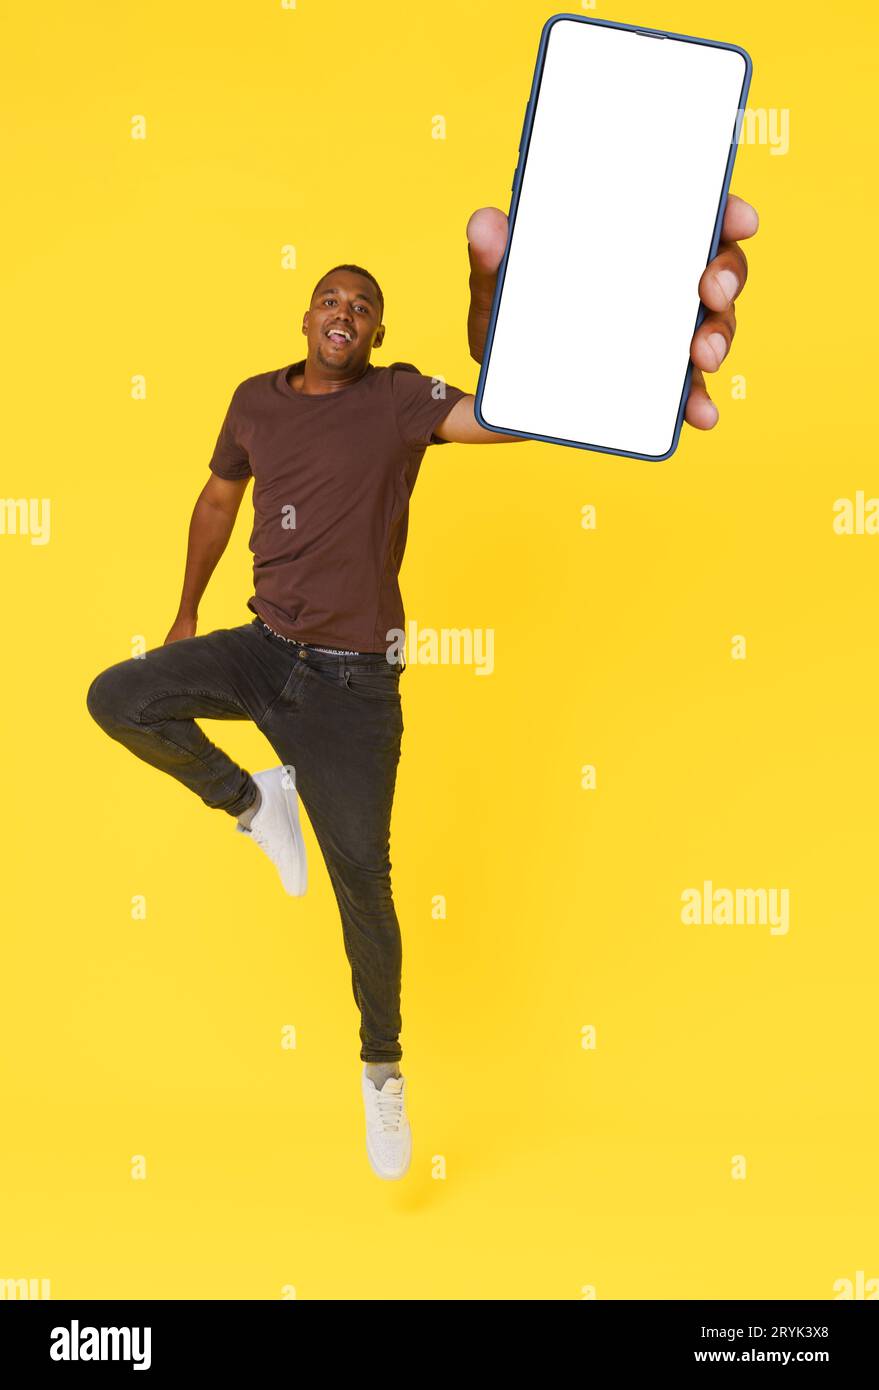 Energetic African American student is captured jumping with mobile phone featuring empty white screen in hand, on yellow backgro Stock Photo